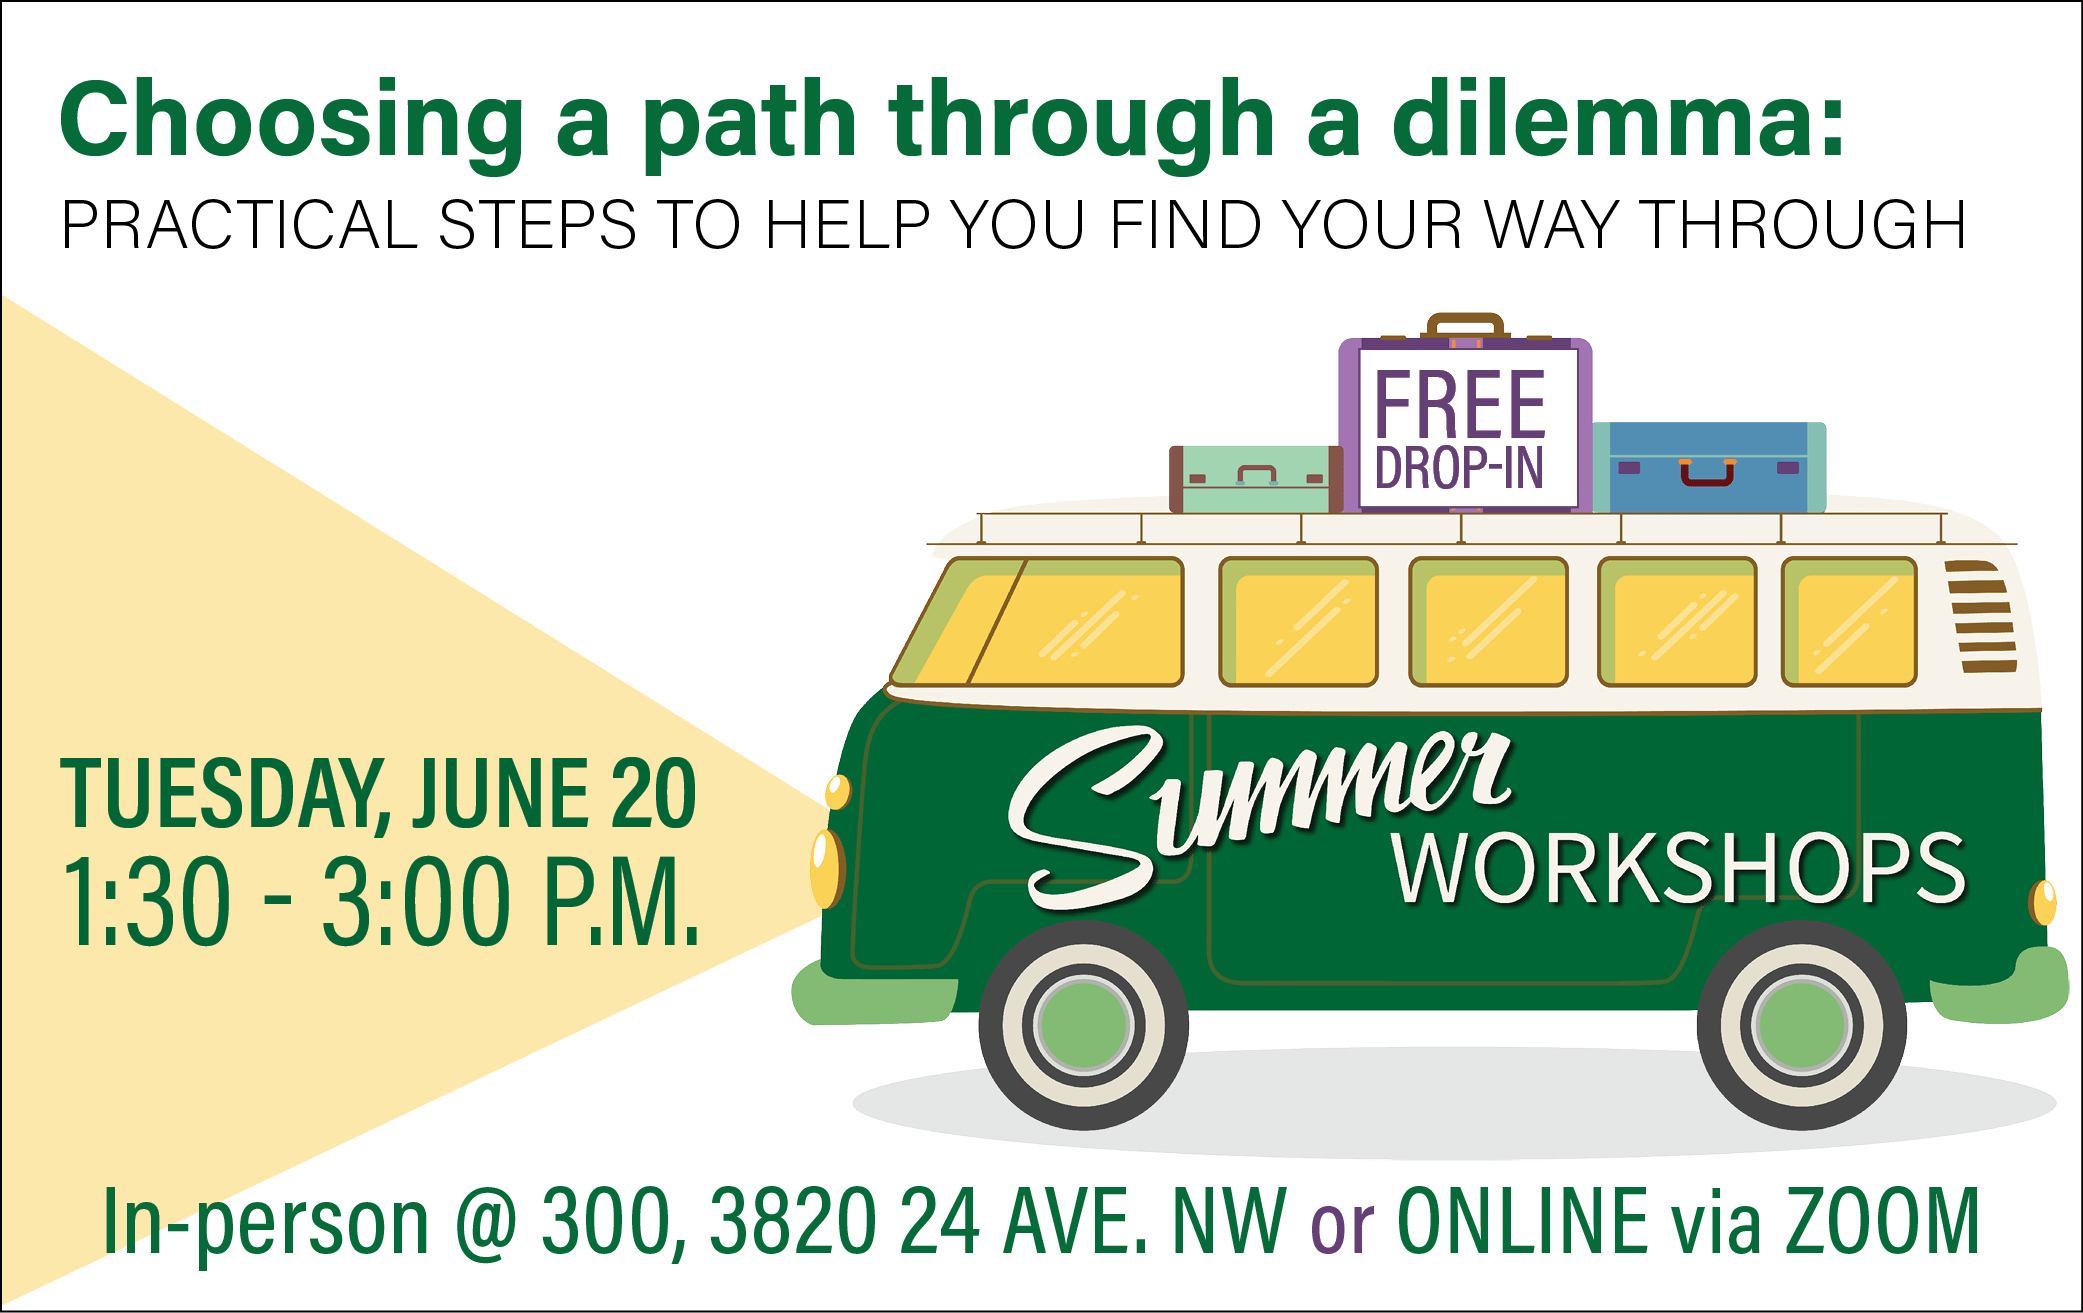 summer workshops, drop in workshops, executive functioning, choosing a path through a dilemma